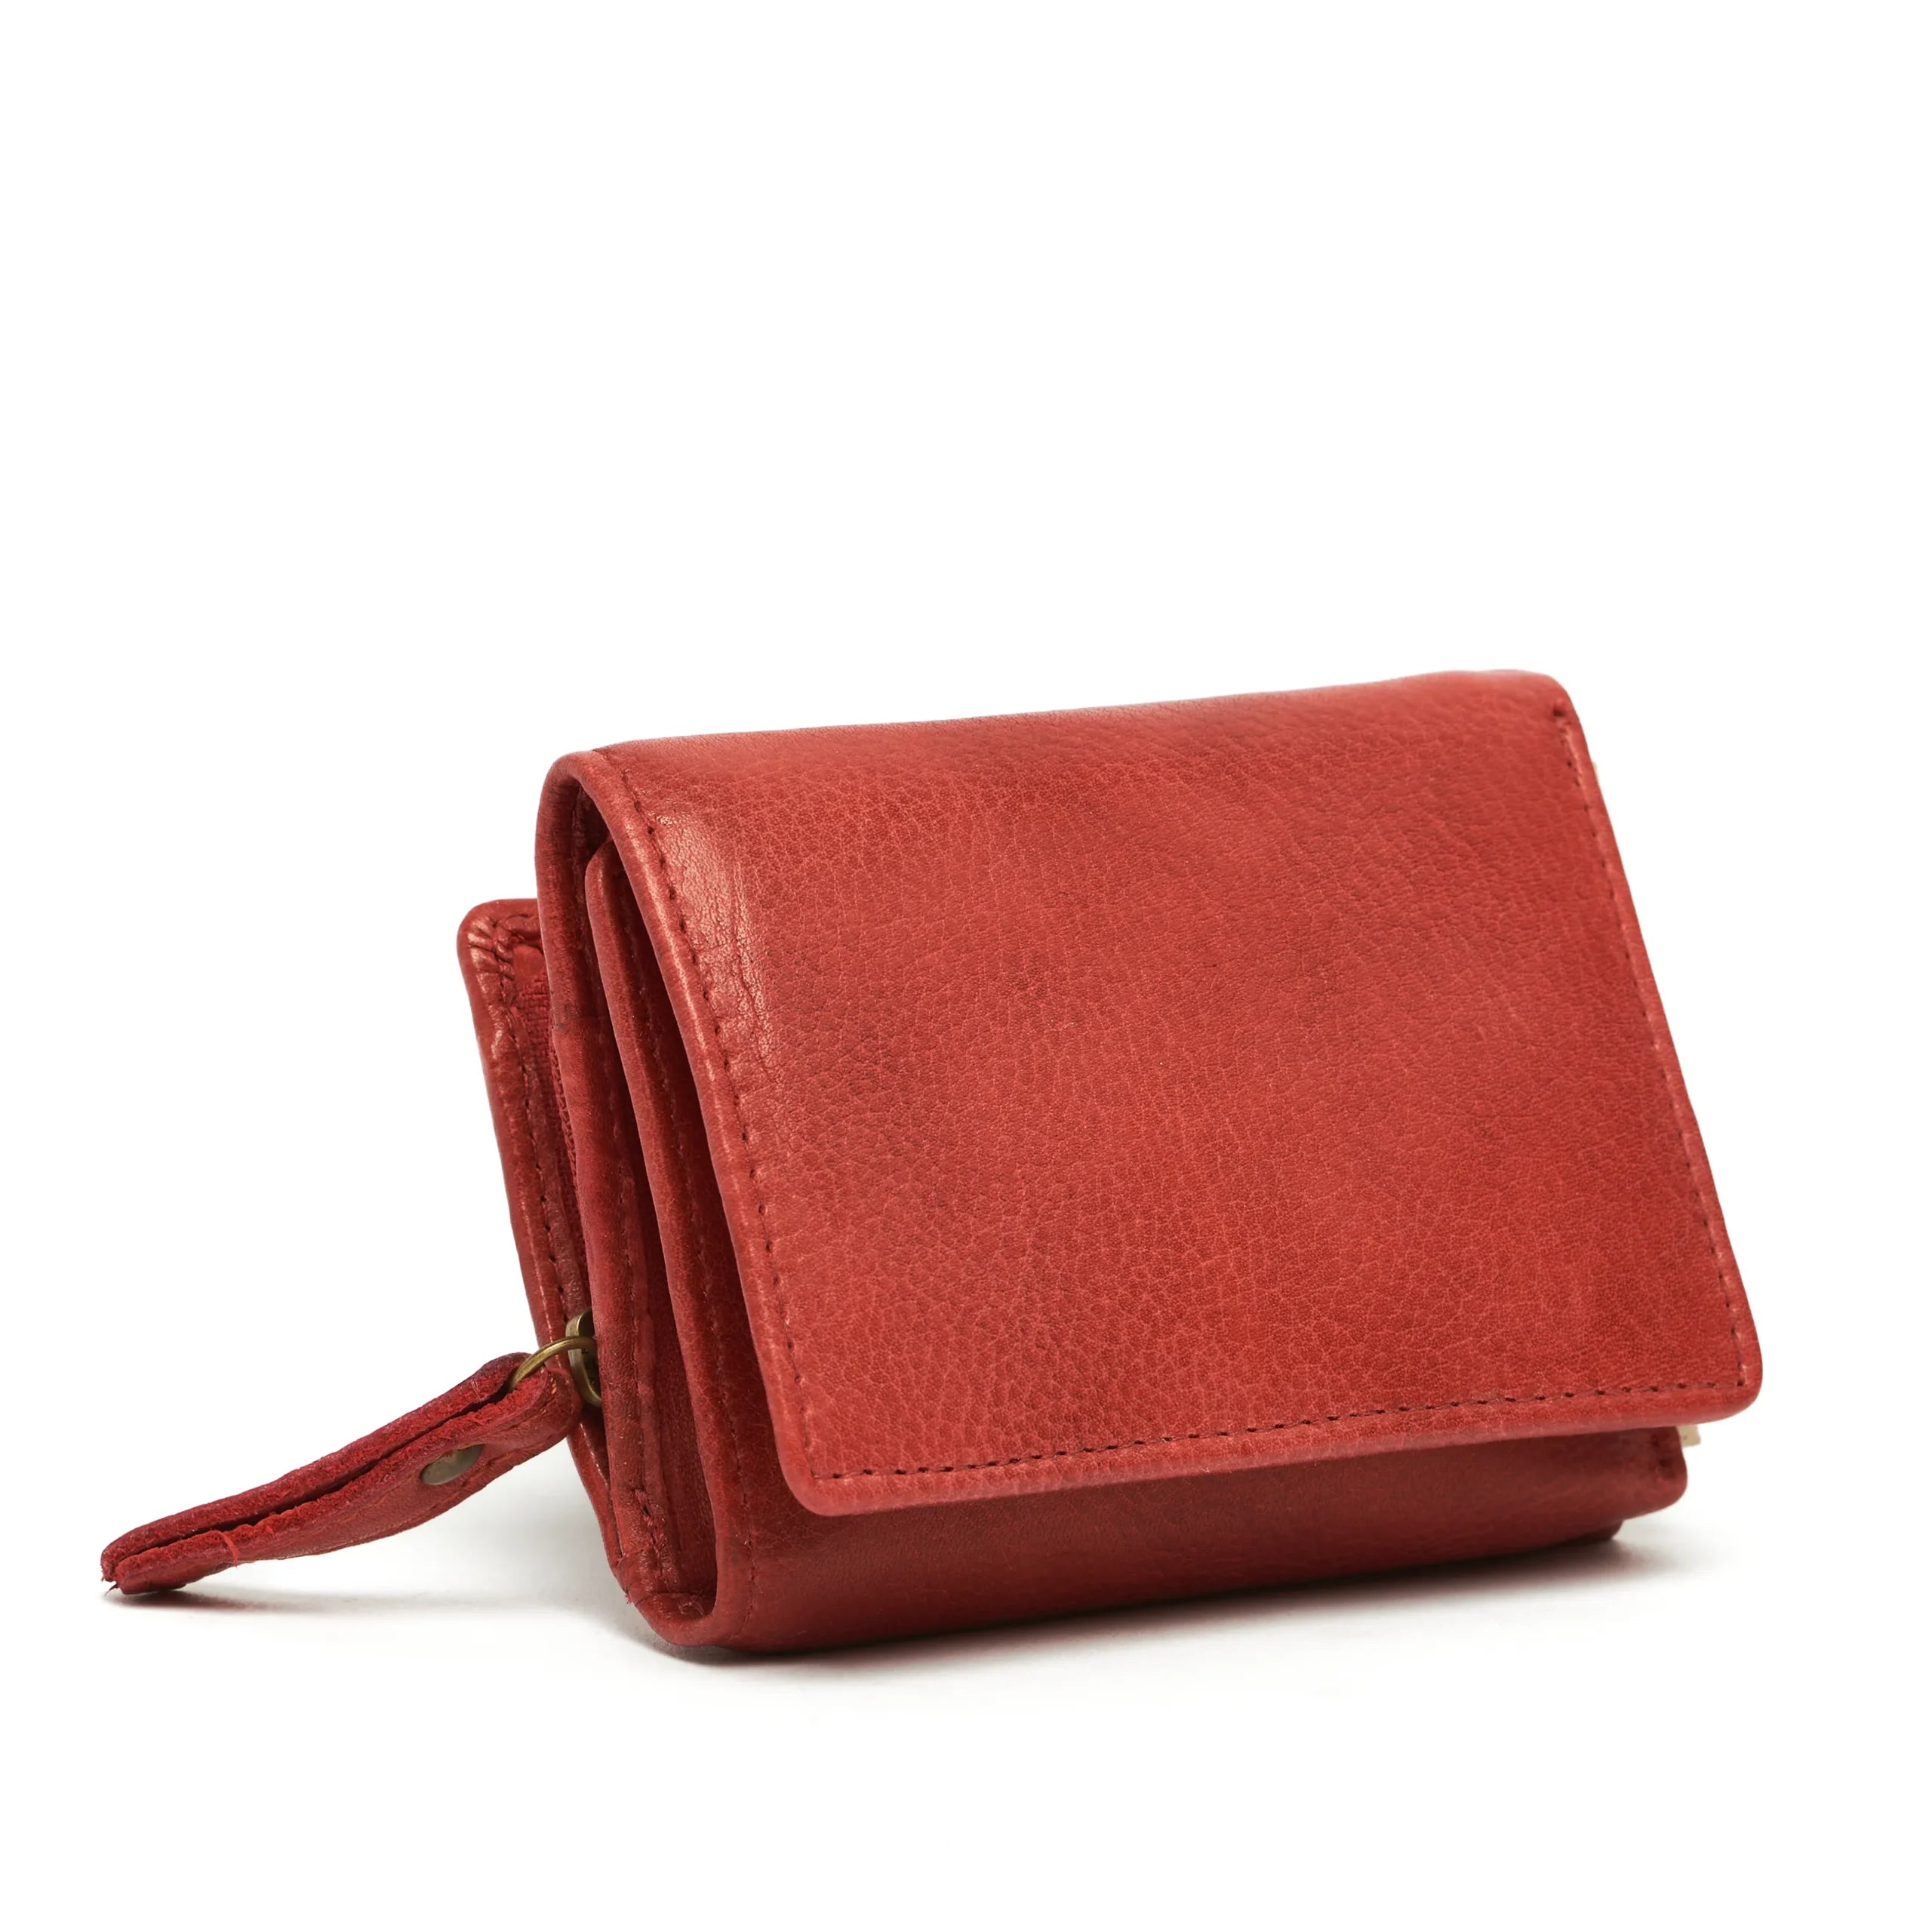 Oran - RH485 Vikky Small RFID leather wallet w Coin section - Red